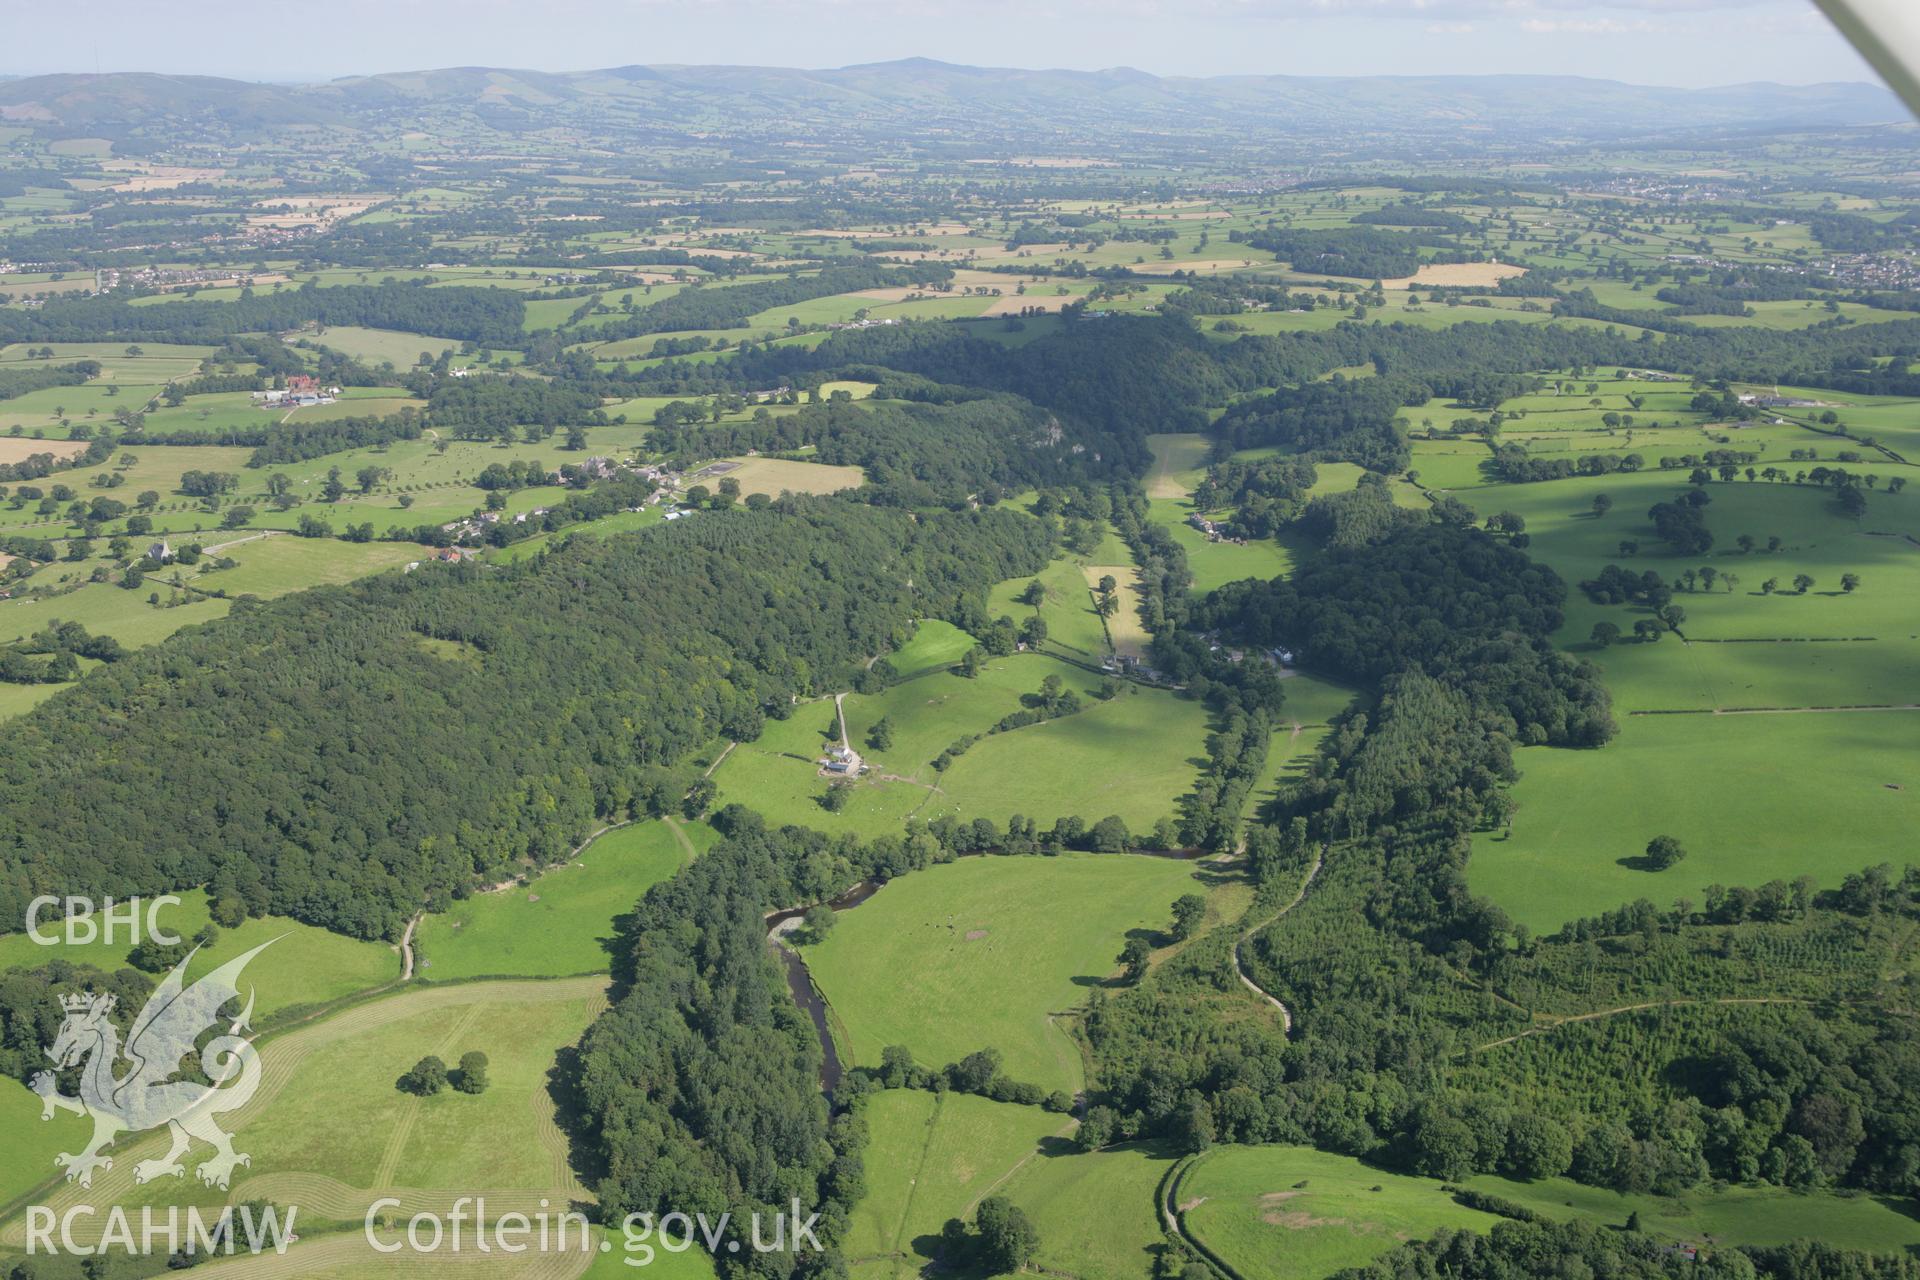 RCAHMW colour oblique aerial photograph of Pontnewydd Cave and surrounding landscape. Taken on 31 July 2007 by Toby Driver